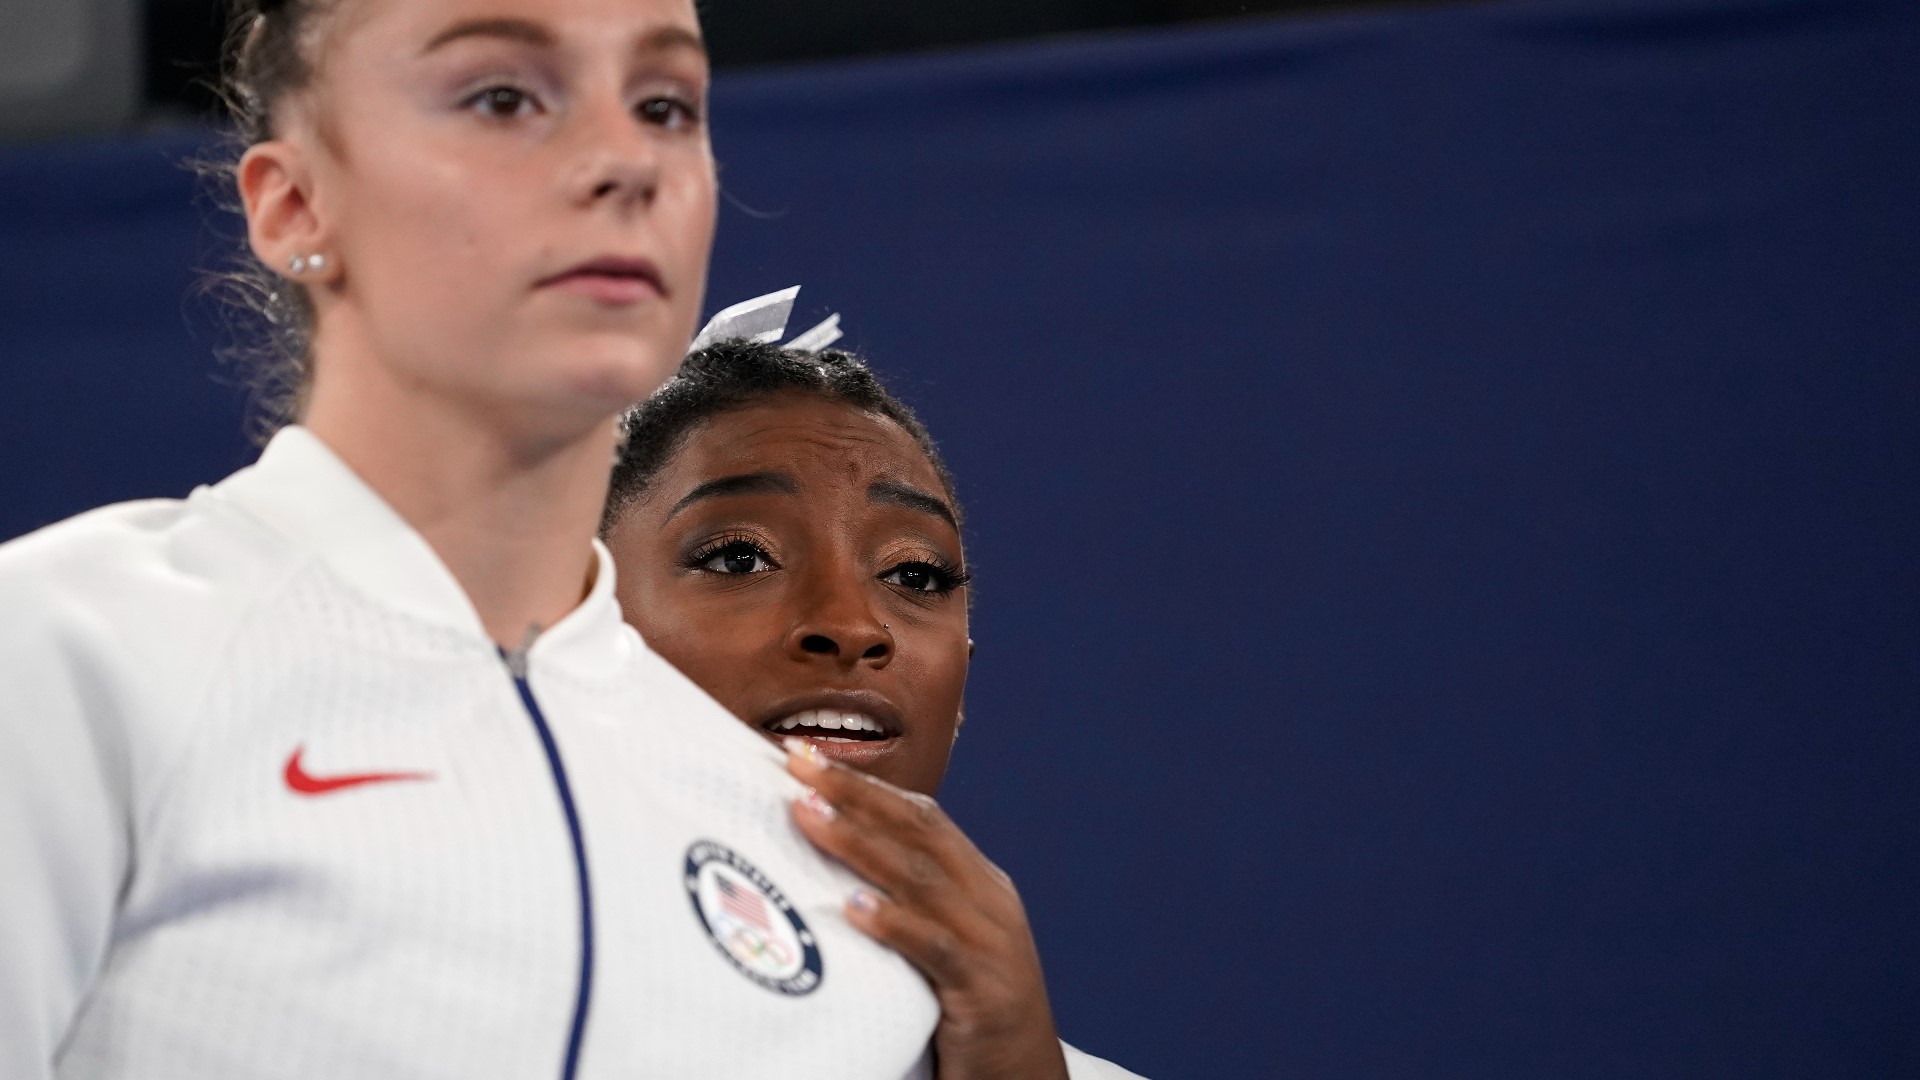 With her announcement Tuesday, Simone Biles launched a conversation that mental health experts say is necessary.